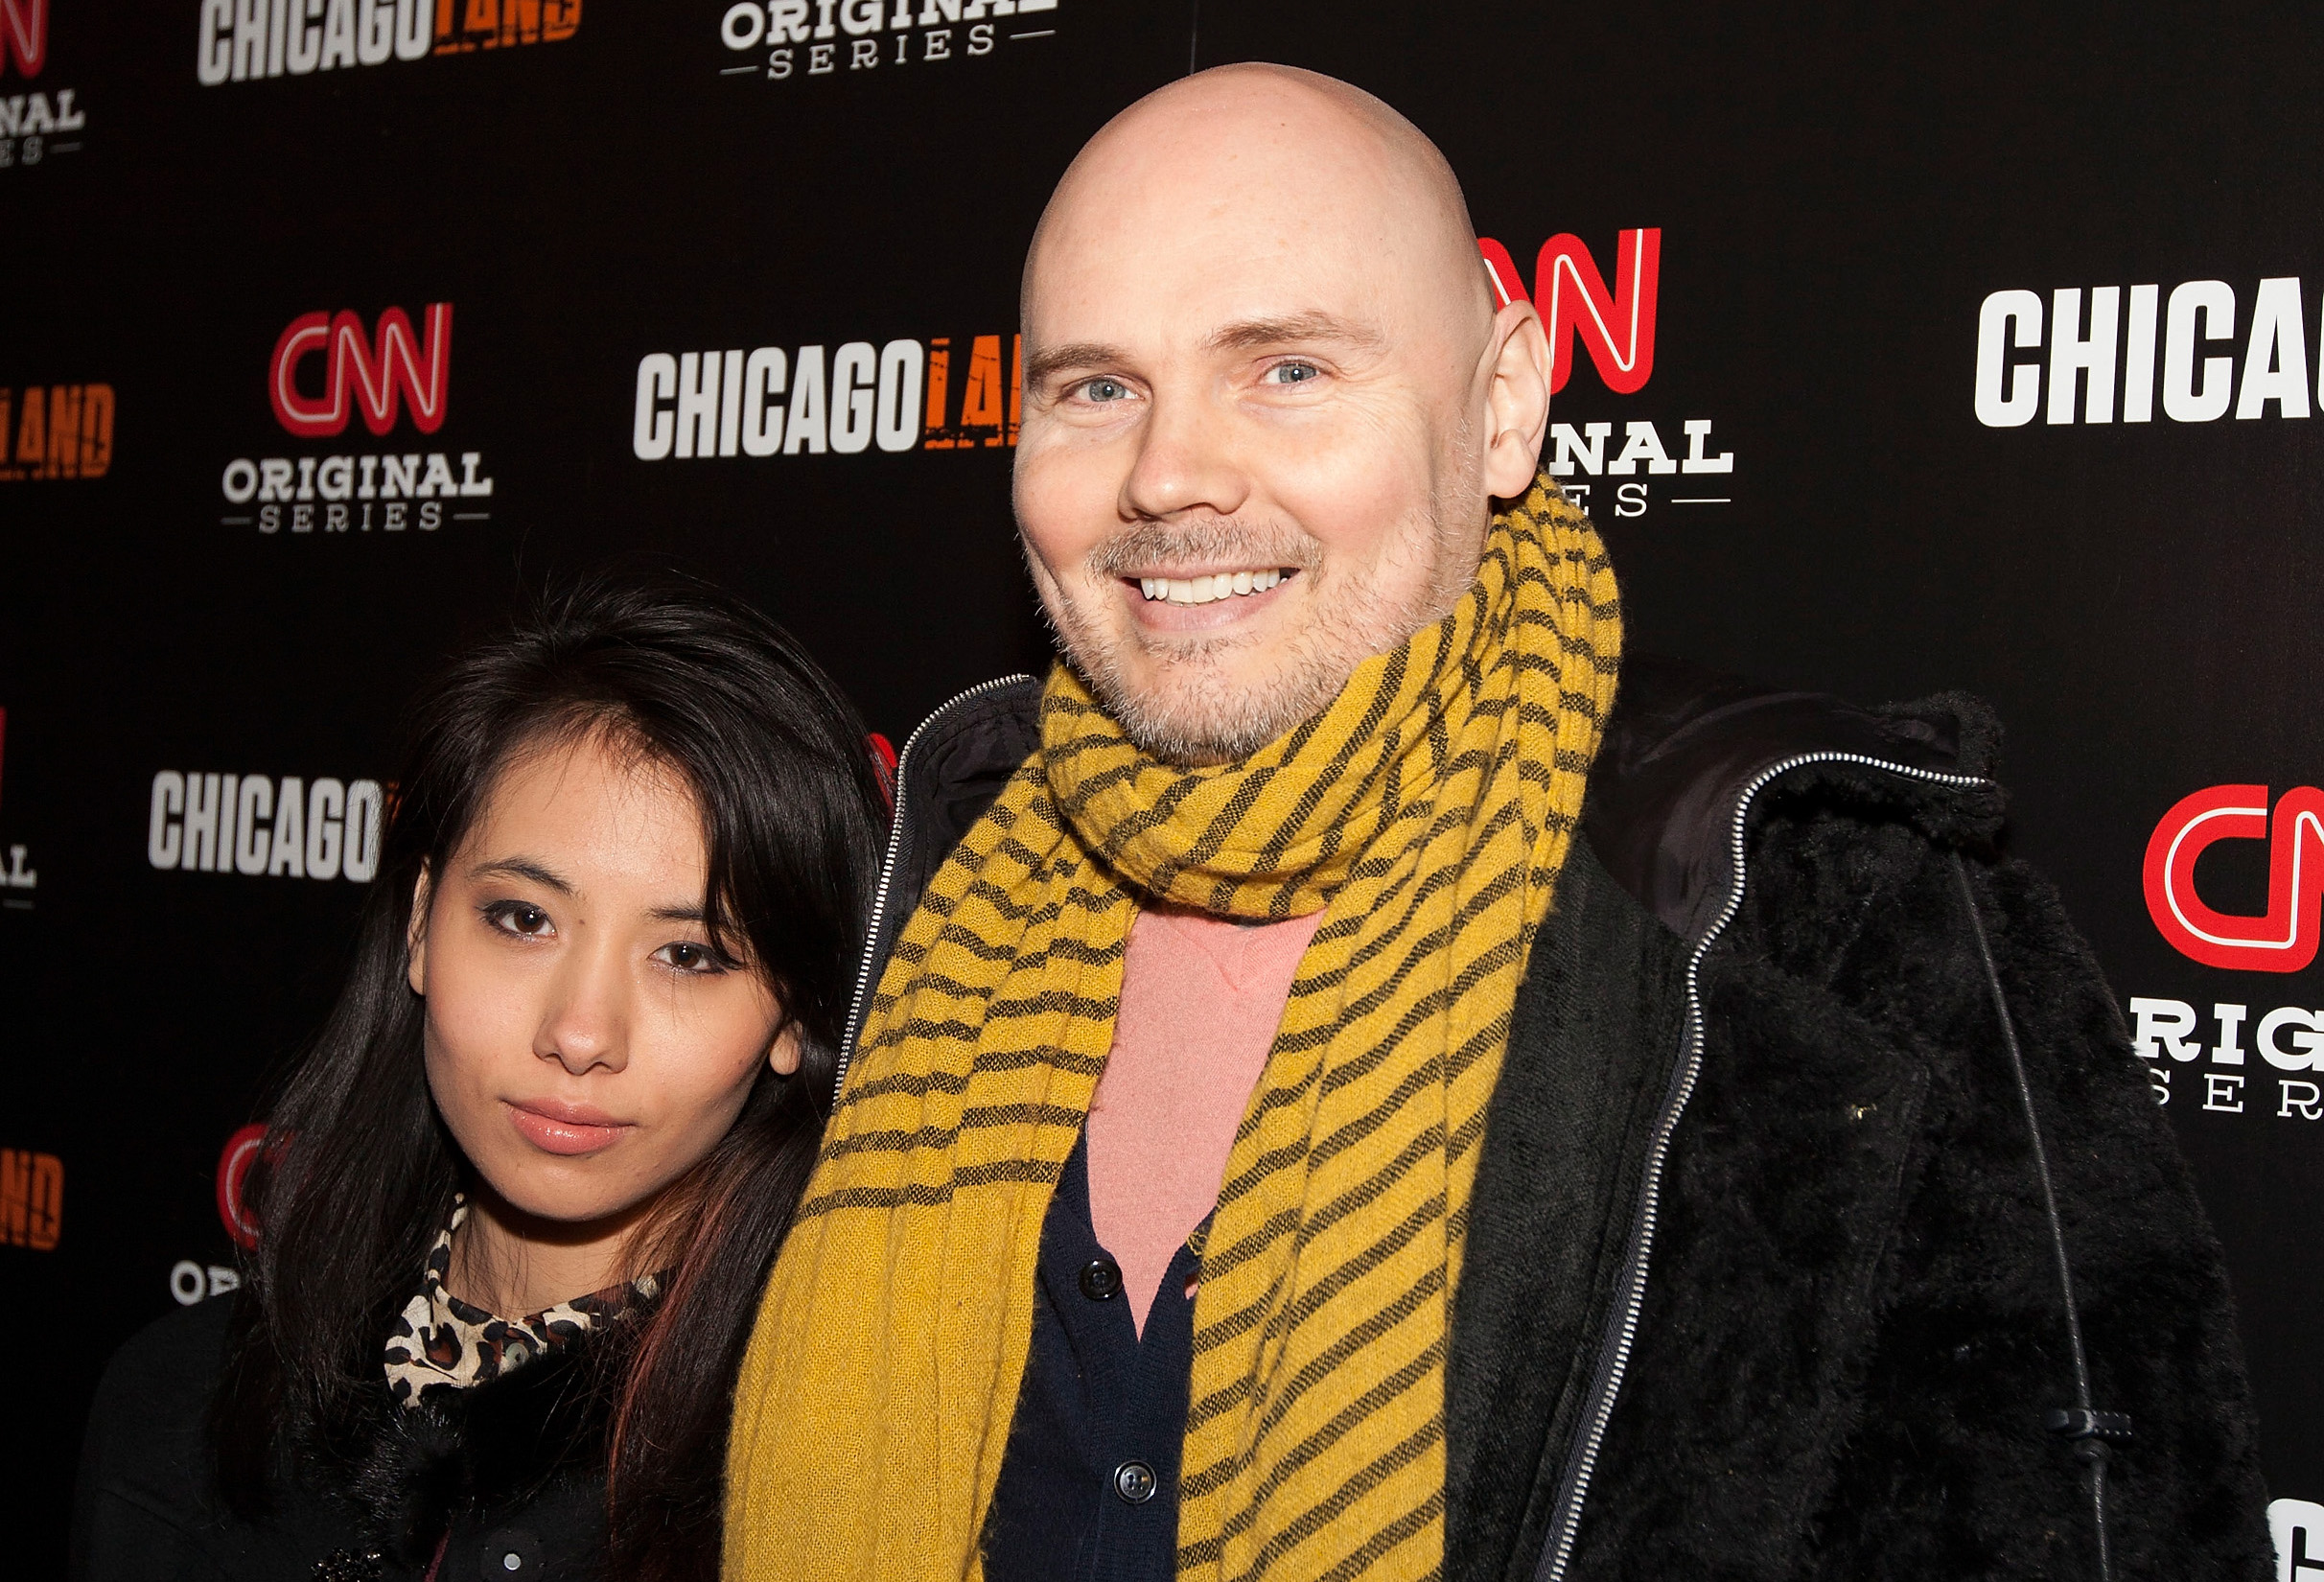 <p>Smashing Pumpkins frontman Billy Corgan is 25 years older than Chloe Mendel, the co-founder of the Maison Atia luxury faux fur brand, with whom he shares two children. The rock star was 55 <a href="https://www.wonderwall.com/celebrity/couples/tk-plus-more-celeb-love-news-653034.gallery?photoId=653473">when he proposed</a> to Chloe on her 30th birthday in September 2022 a decade after they started dating.</p>